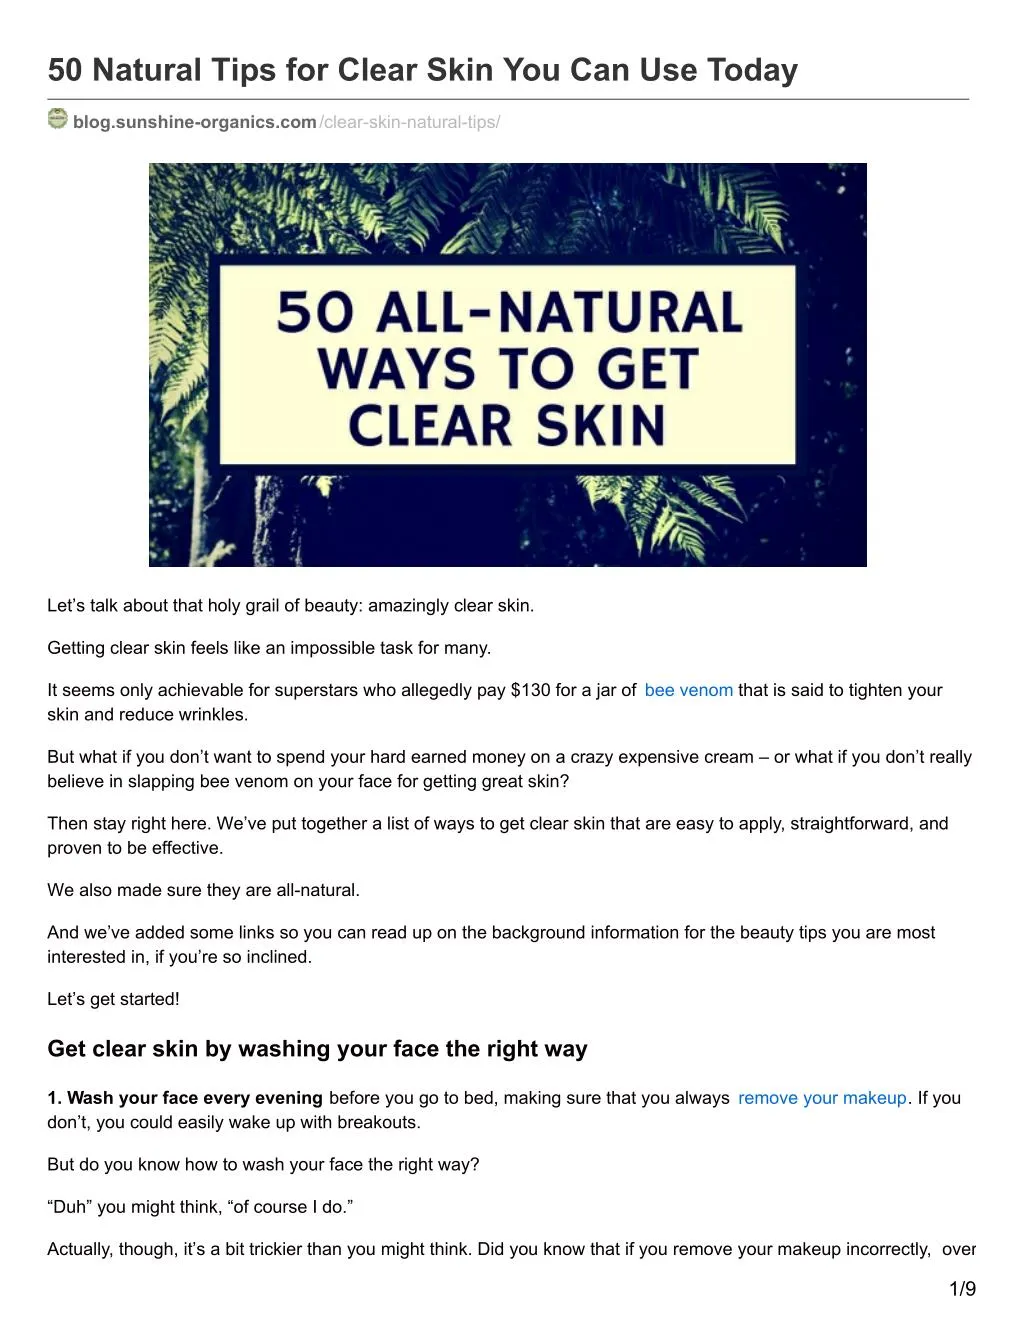 50 natural tips for clear skin you can use today